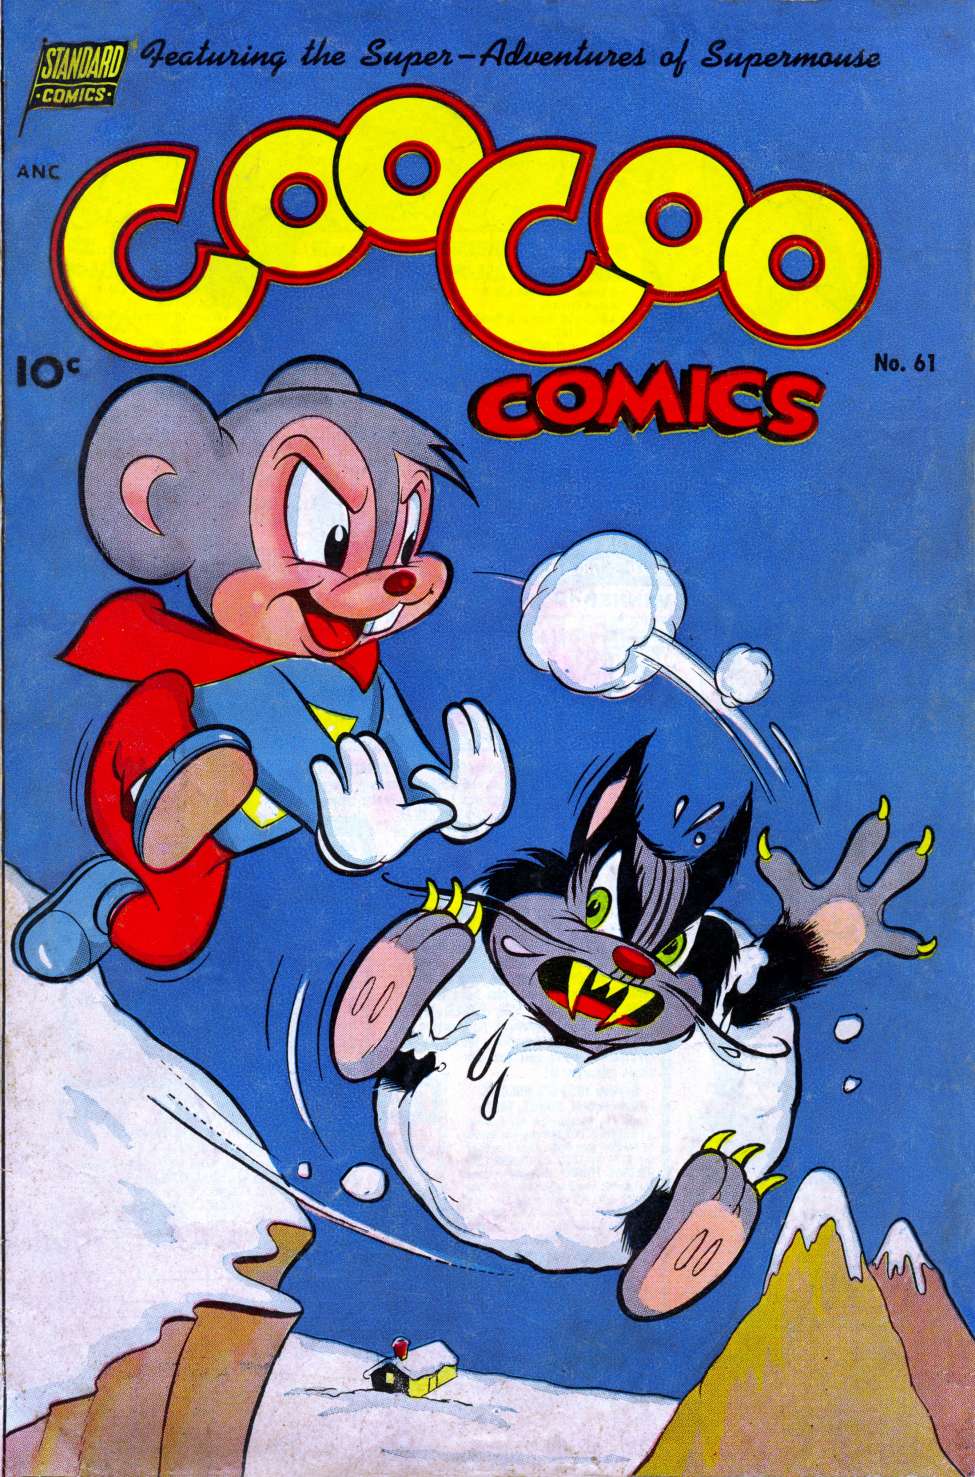 Book Cover For Coo Coo Comics 61